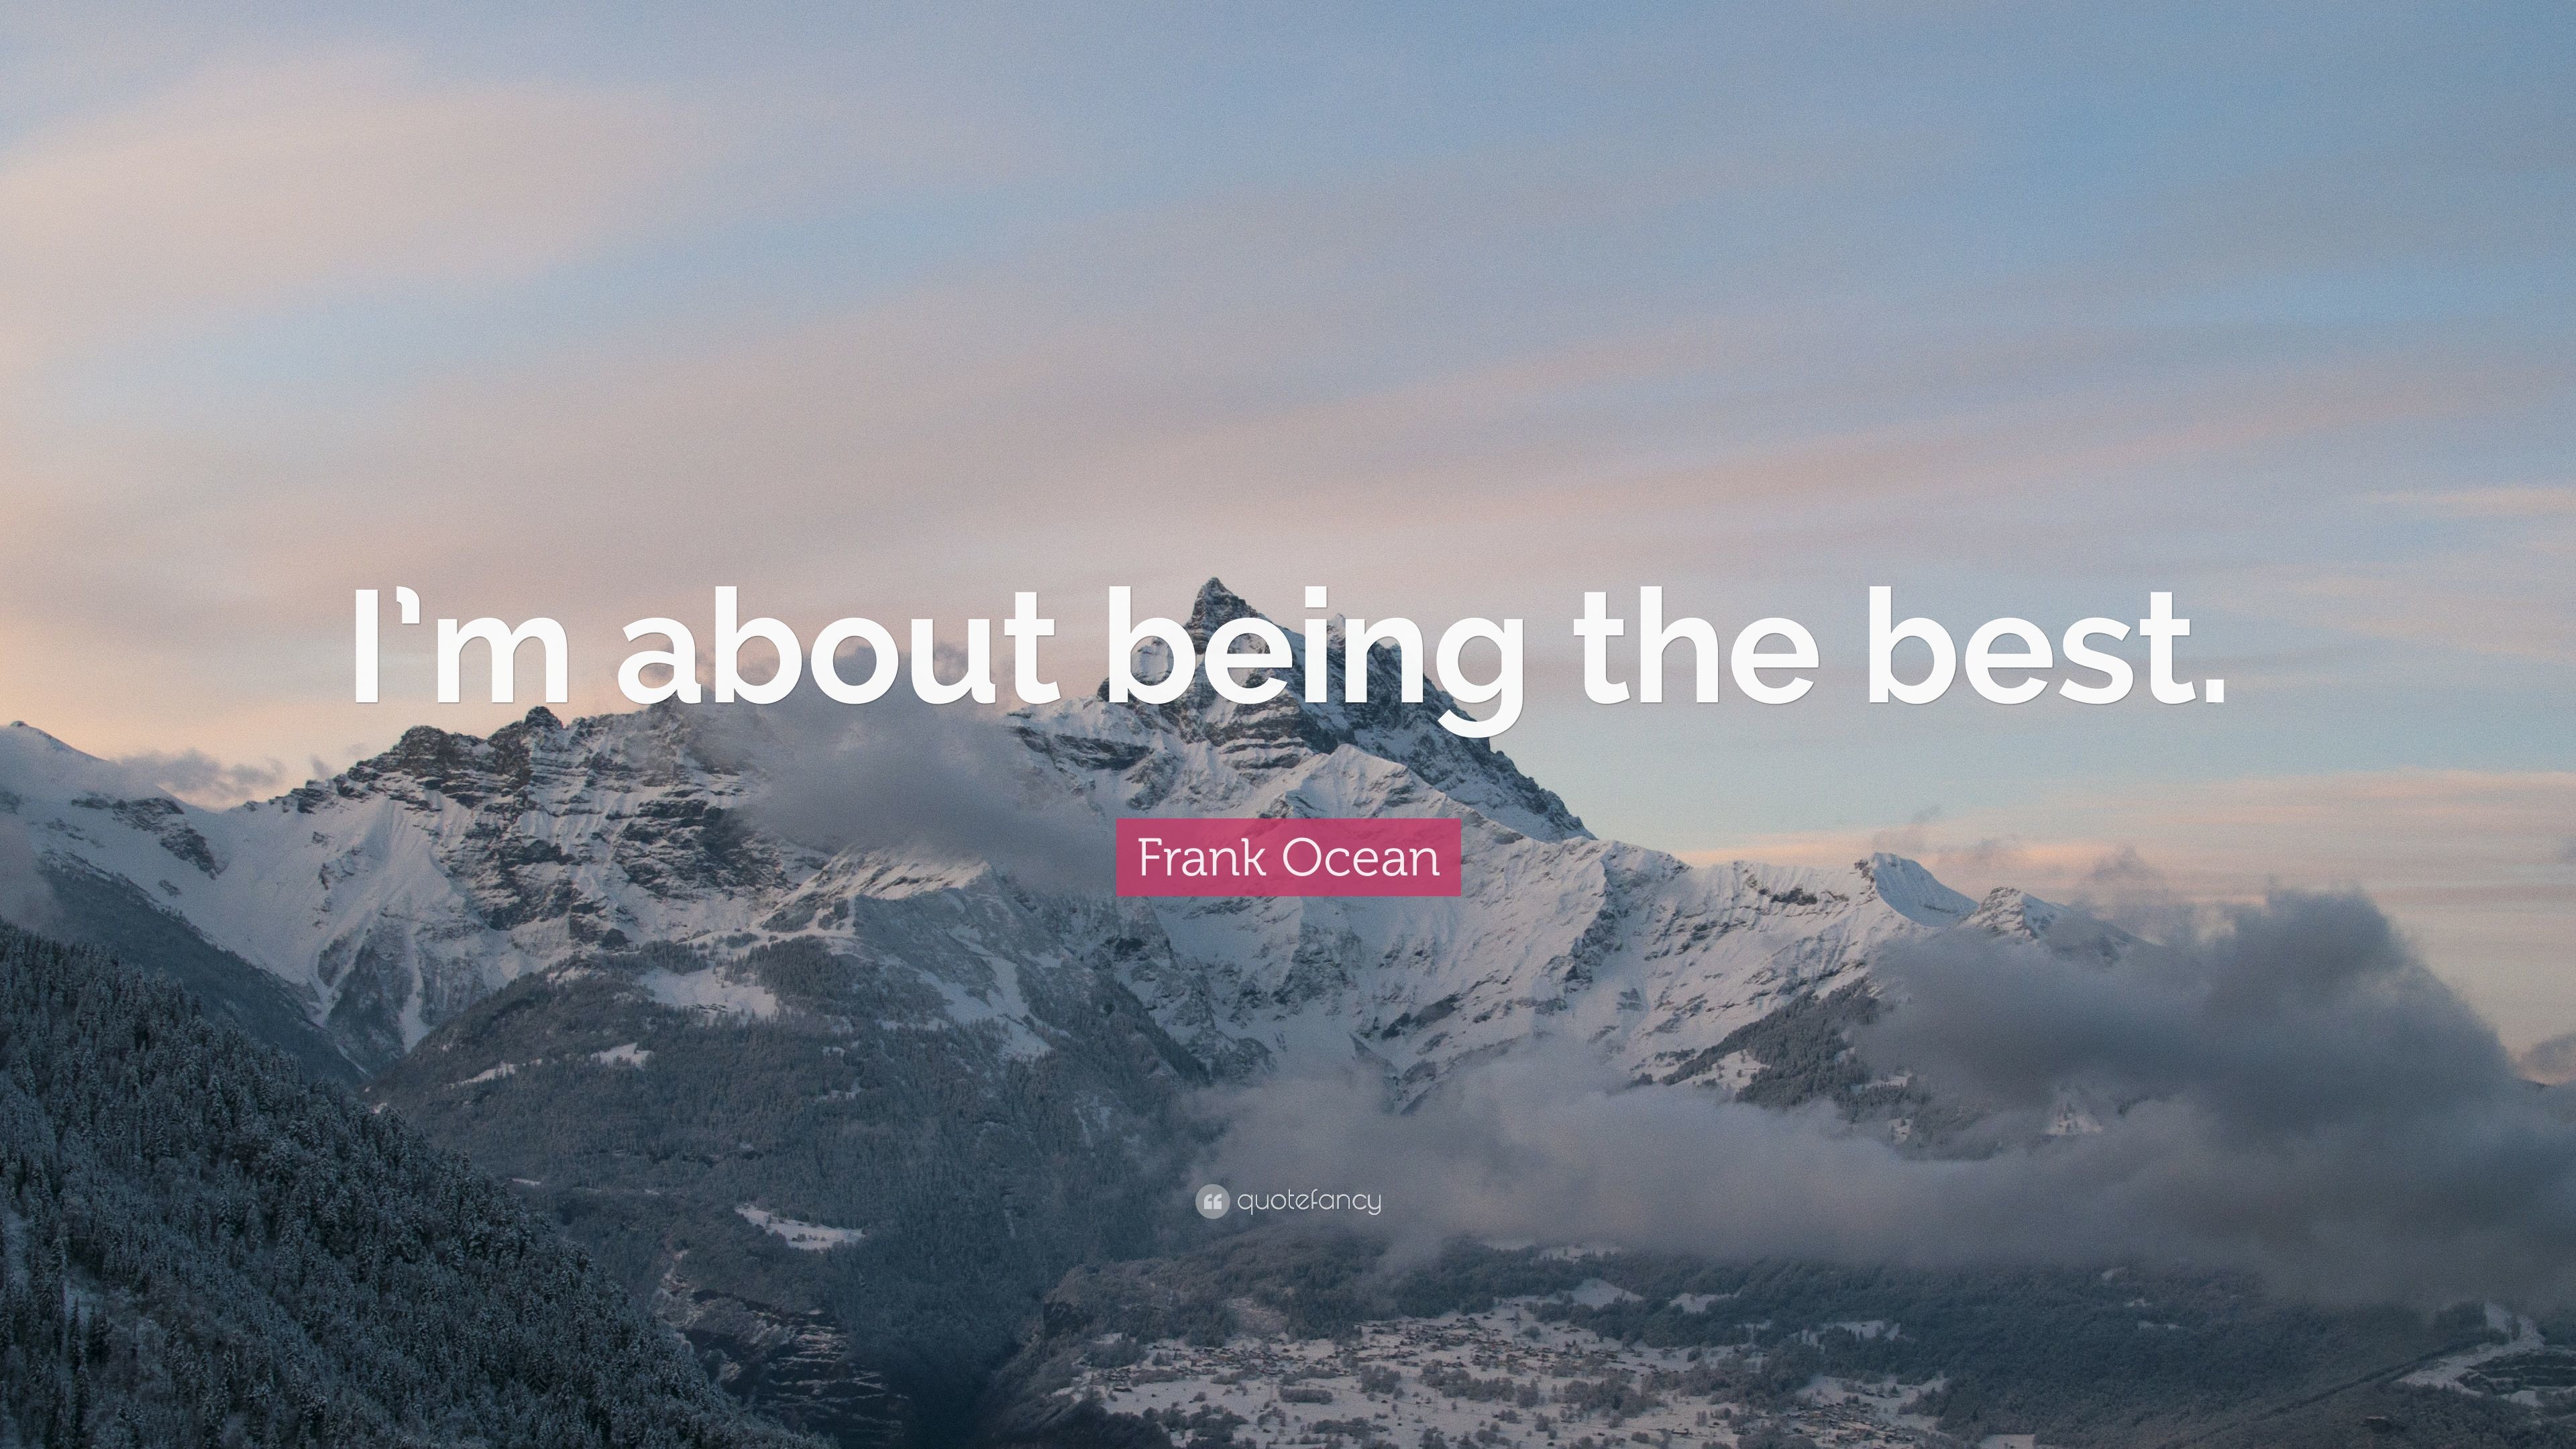 3840x2160 Frank Ocean Quote: “I'm about being the best.”